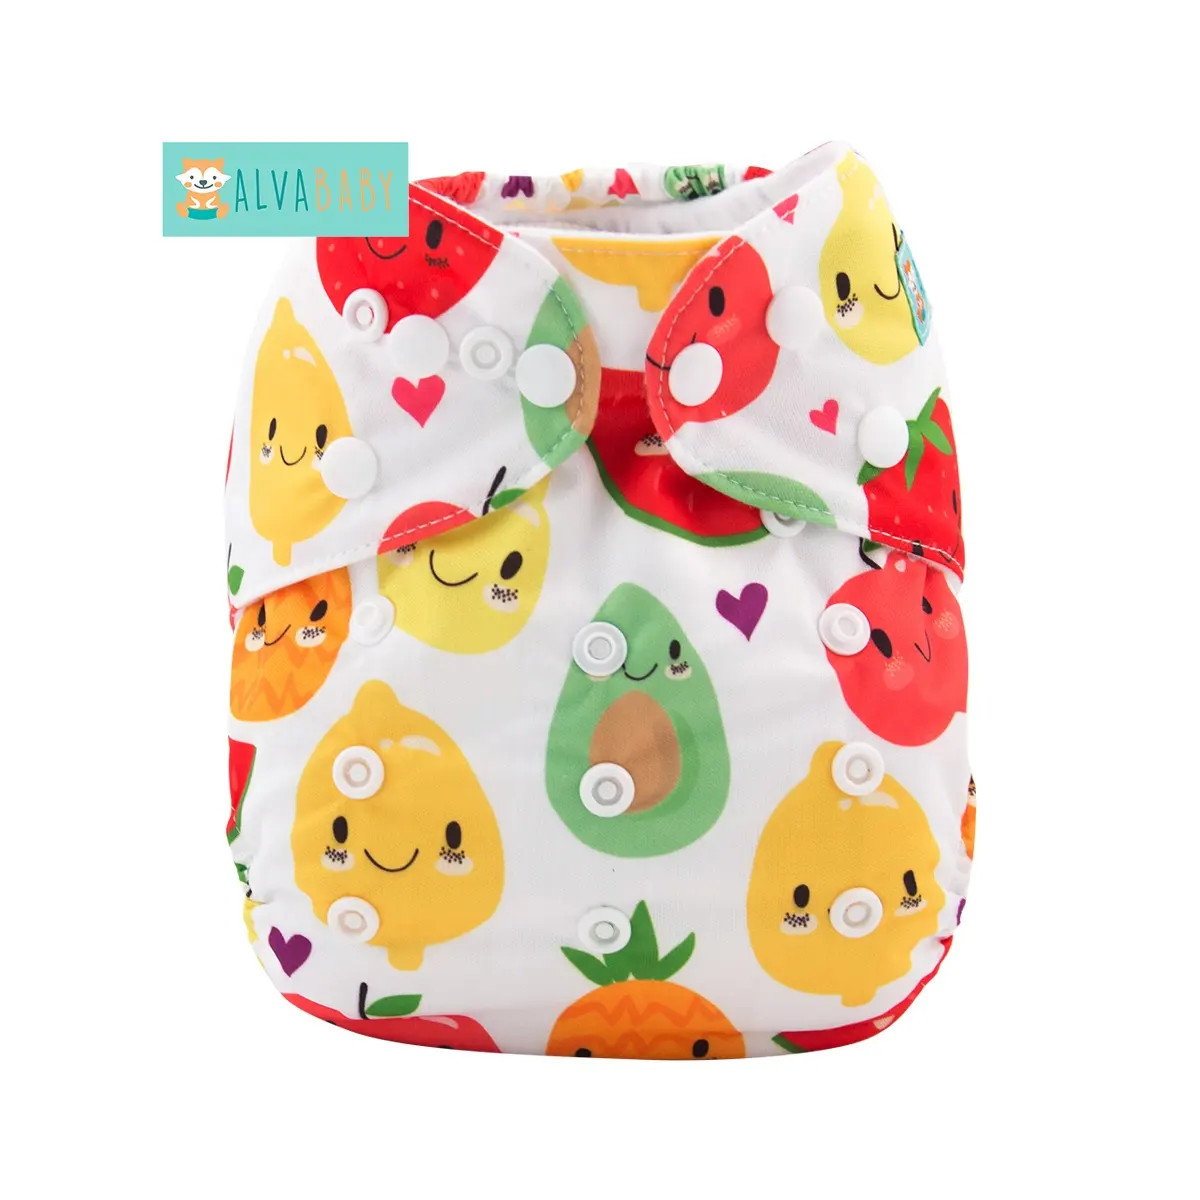 Alvababy New Pattern Rabbit and Balloon Baby Diaper Cloth Diaper Manufacturers in China